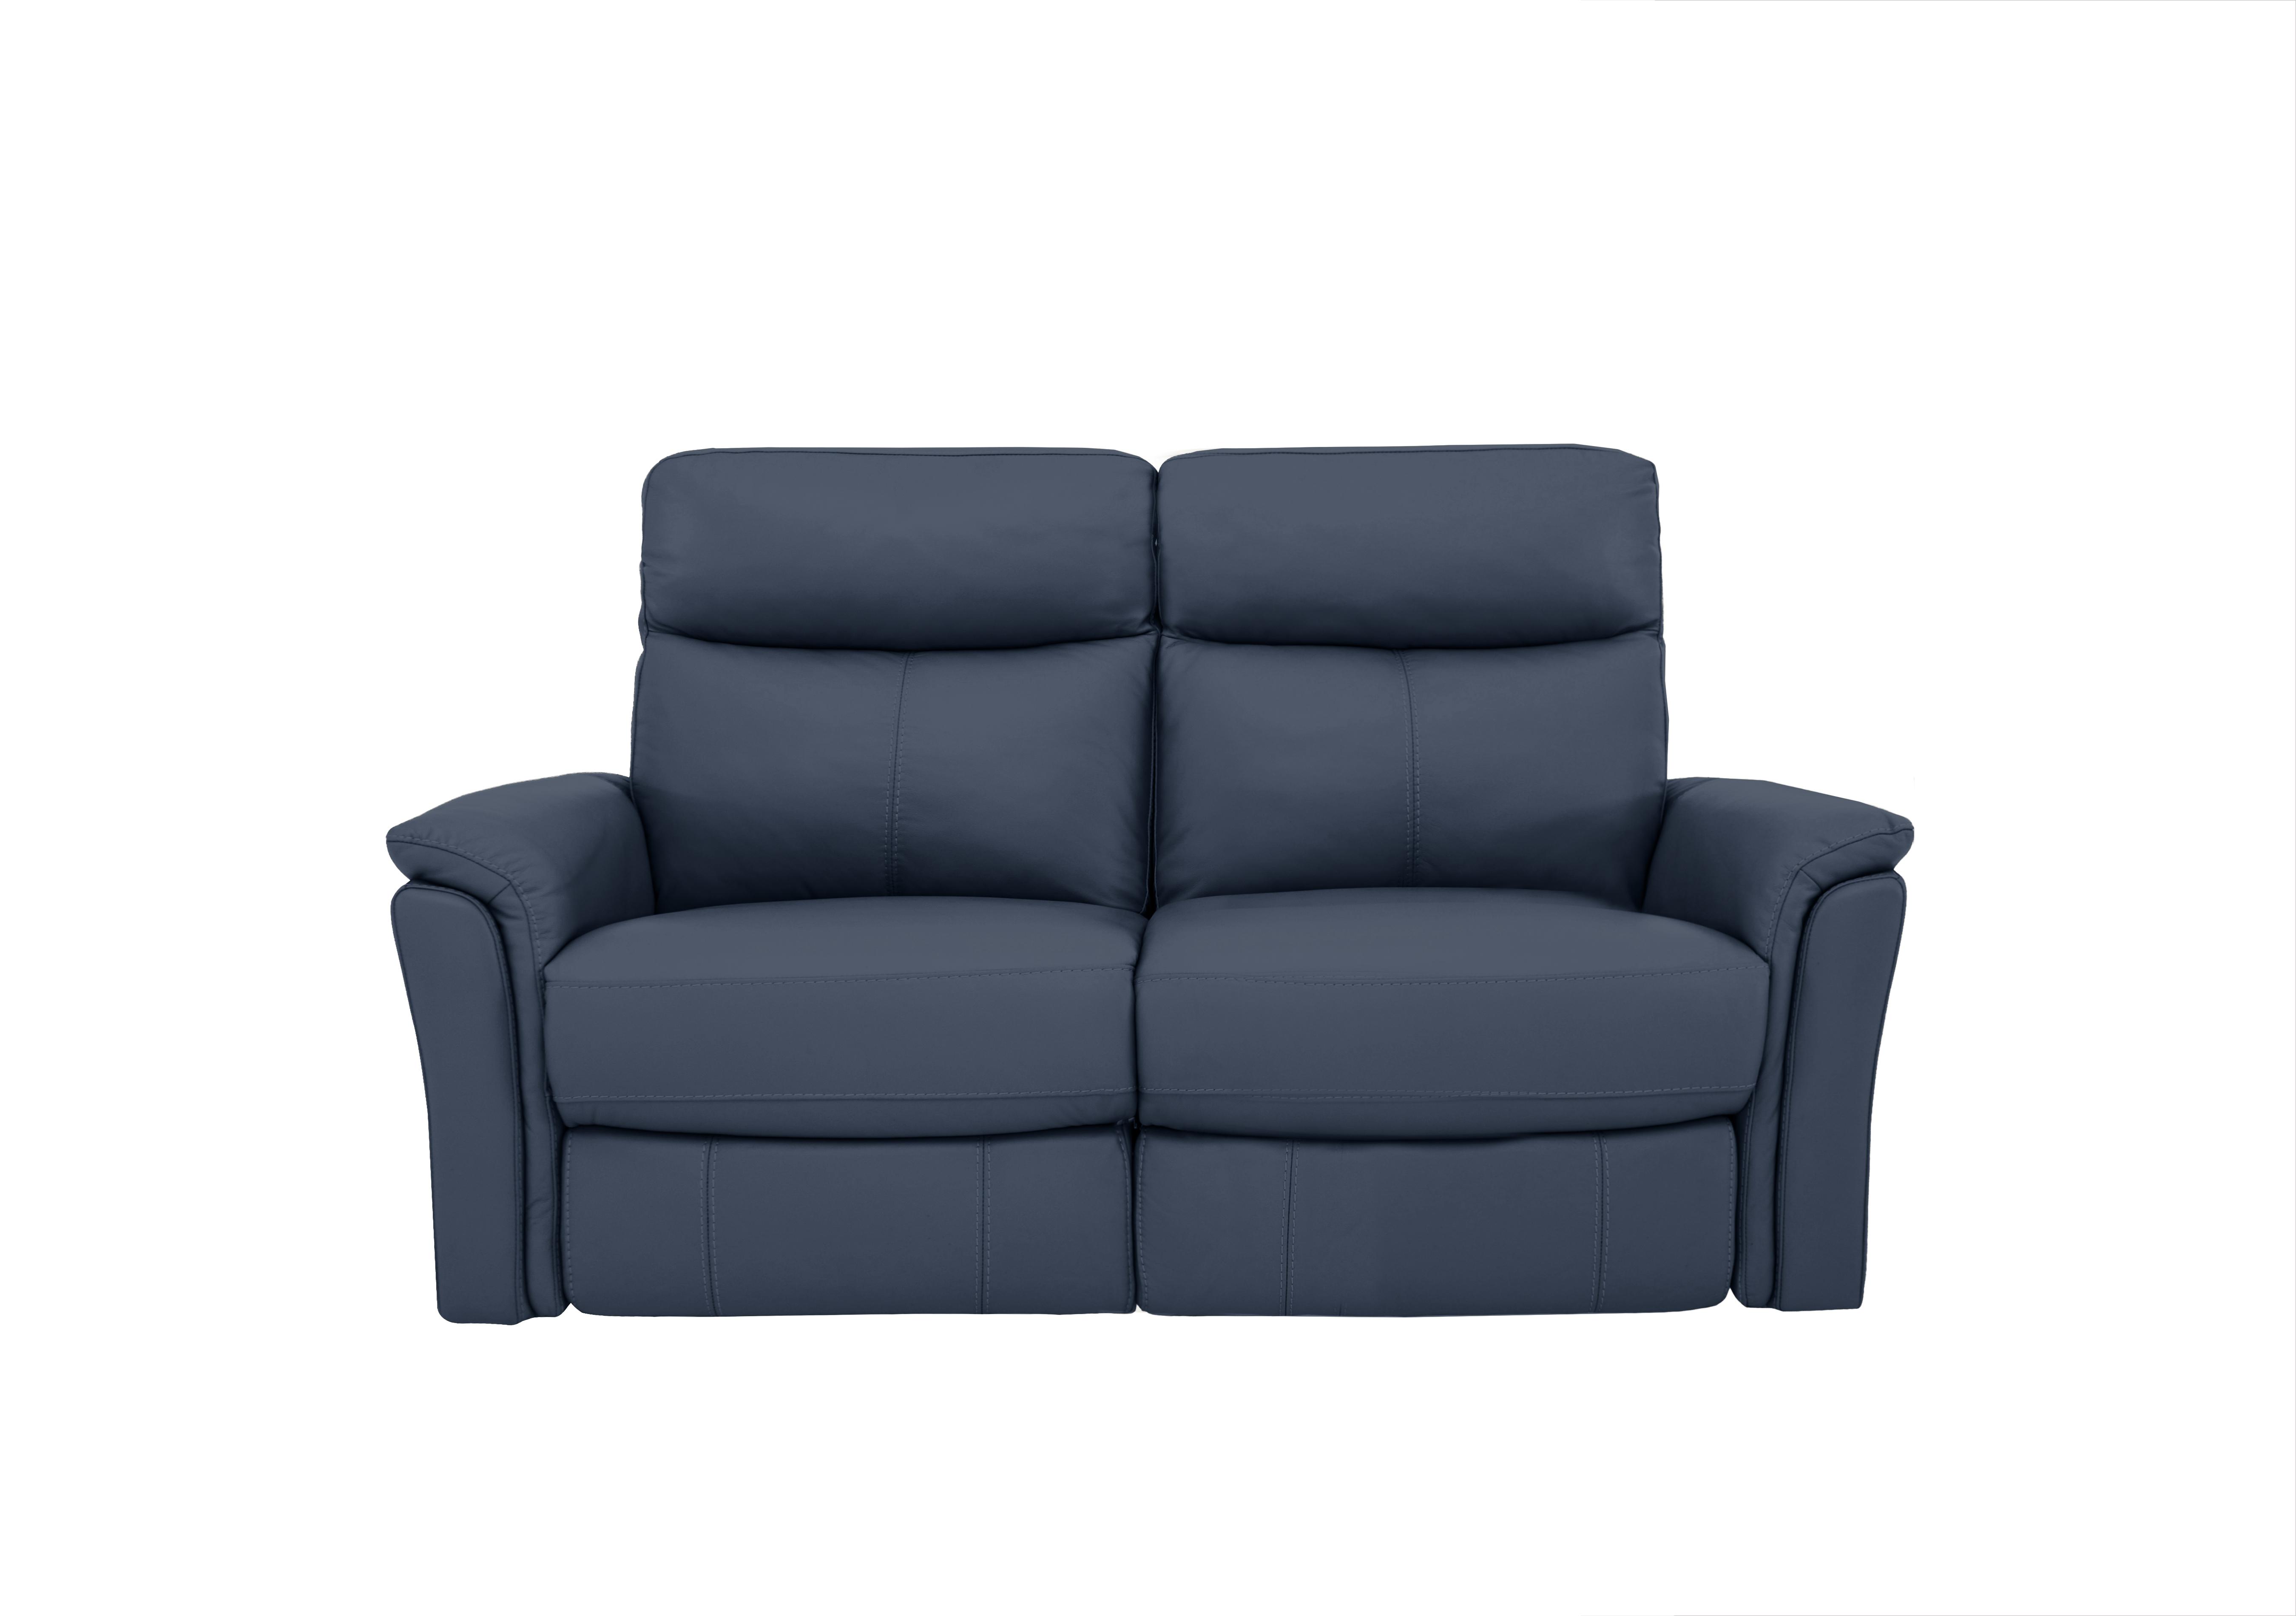 Compact Collection Piccolo 2 Seater Leather Static Sofa in Bv-313e Ocean Blue on Furniture Village